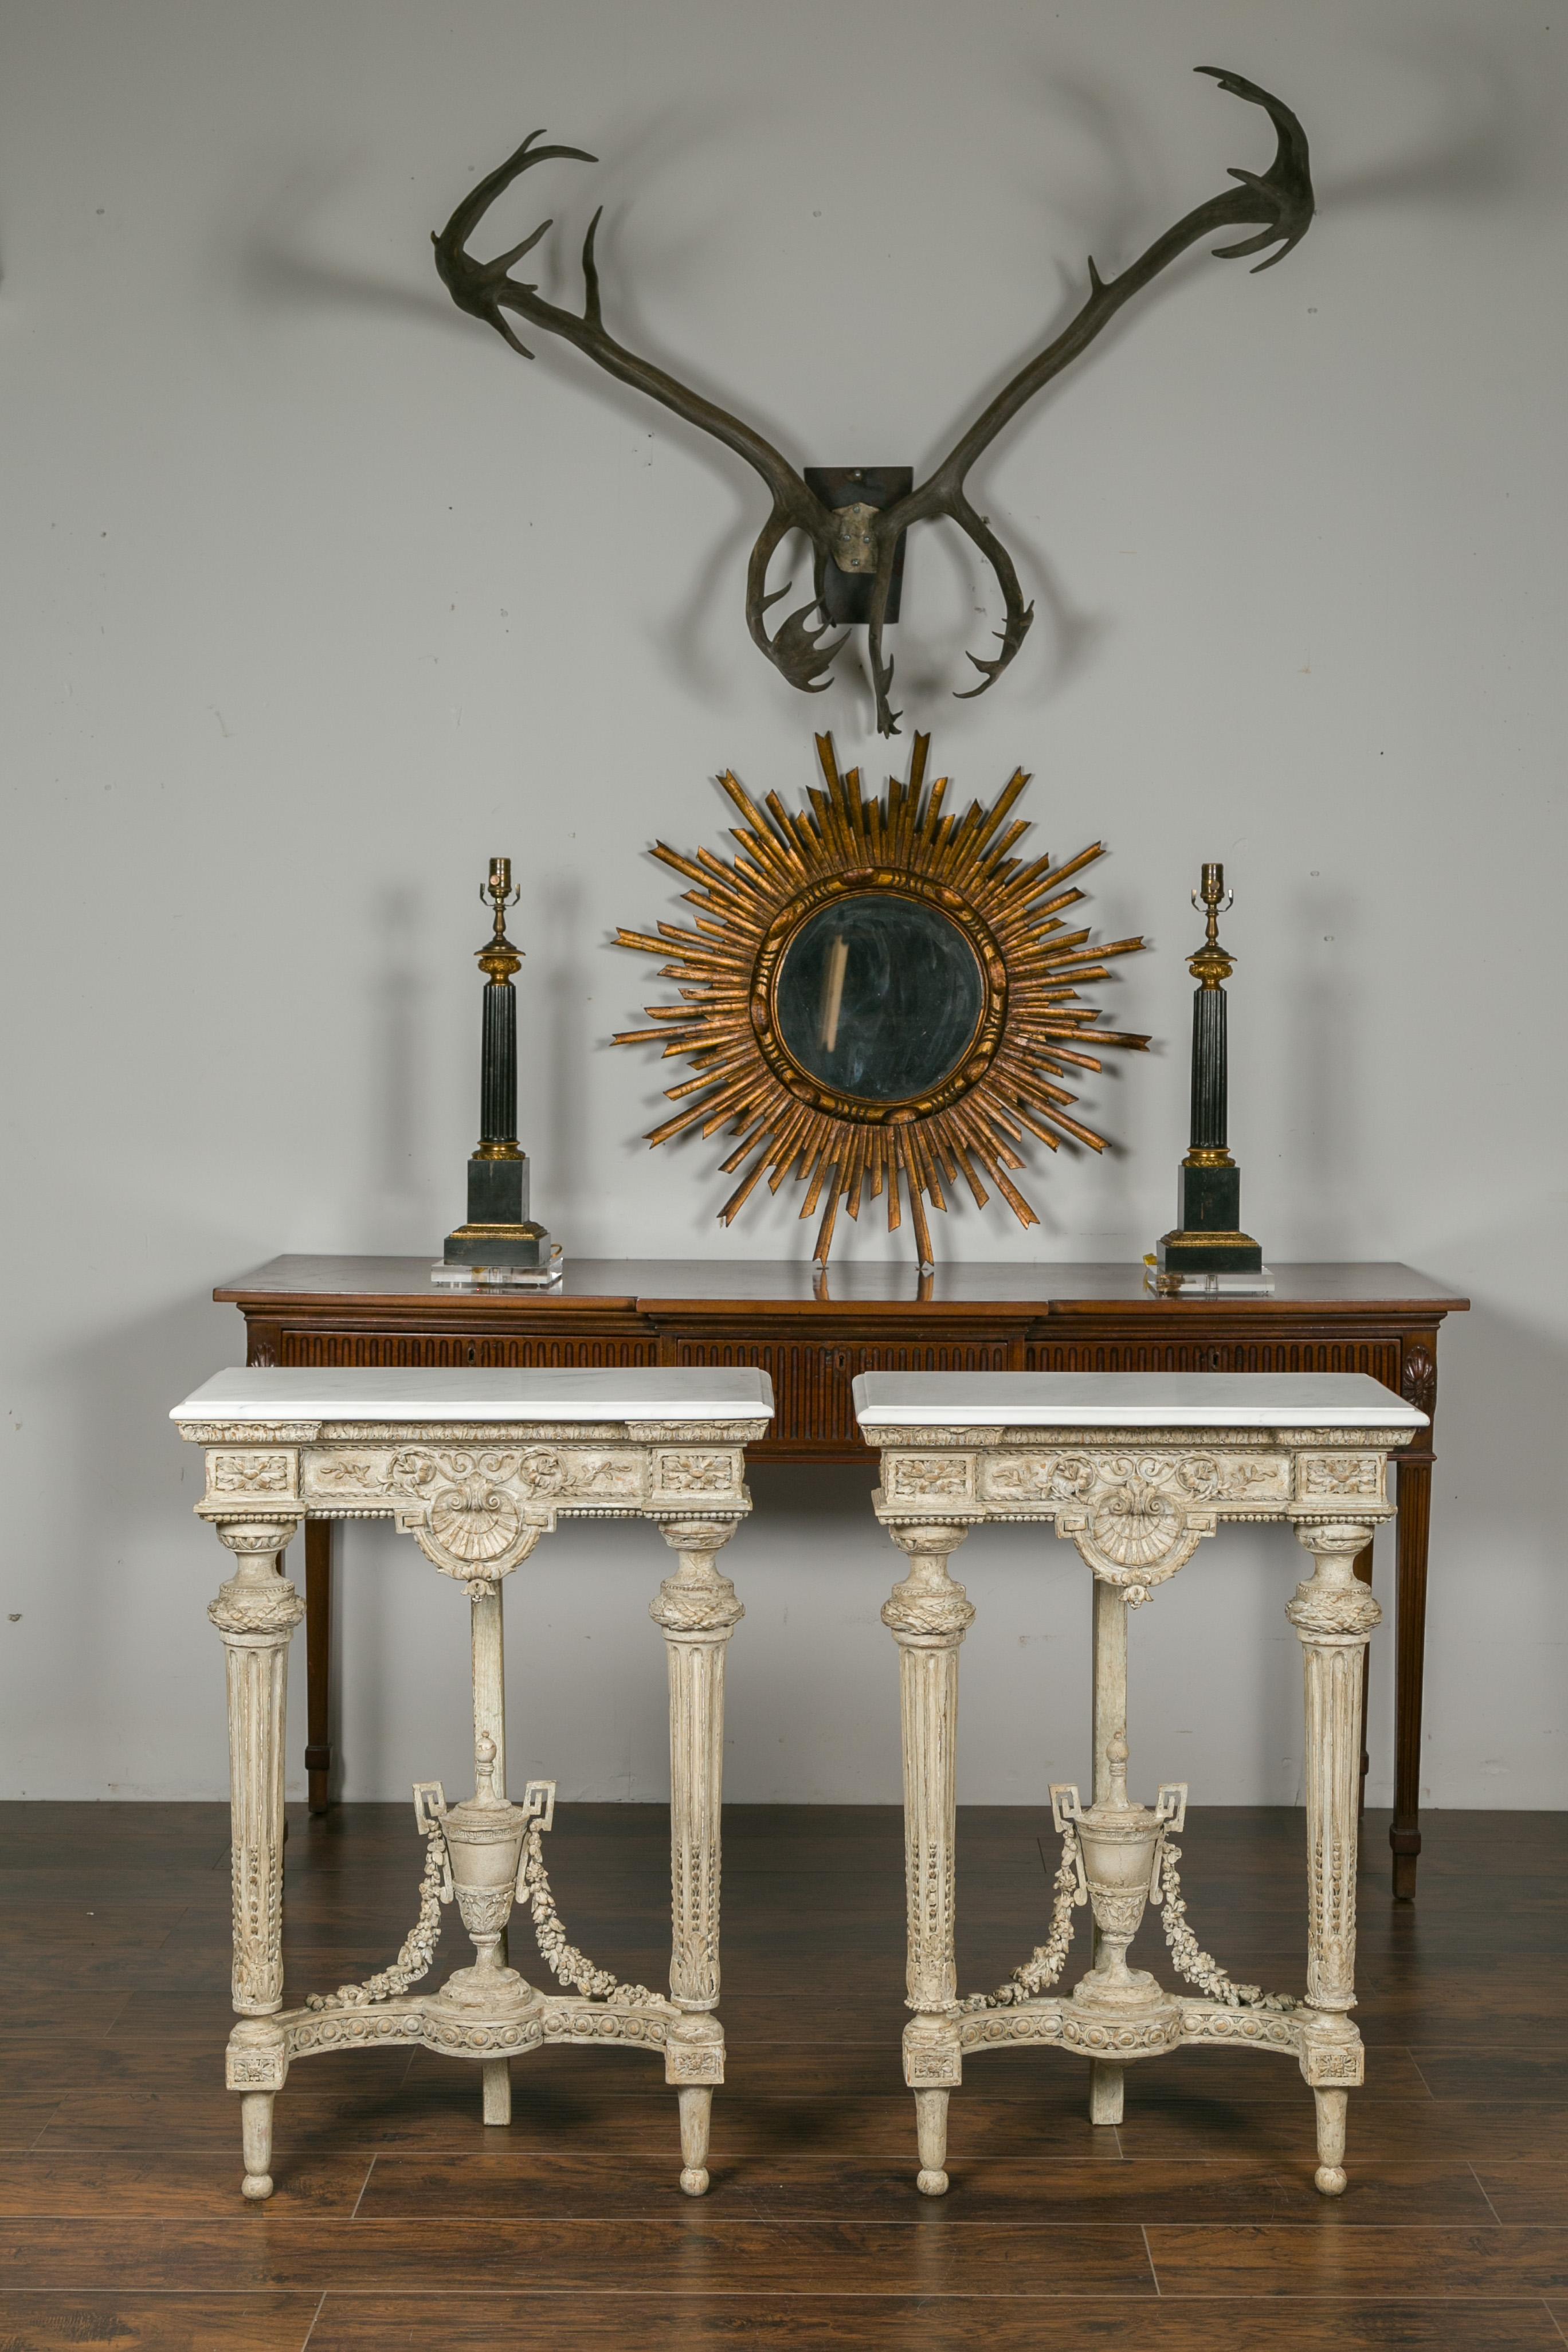 A pair of French Napoleon III period console tables from the late 19th century, with white marble tops, carved floral décor and refreshed paint. Born in France at the end of Emperor Napoleon III's reign, each of this pair of painted wood console